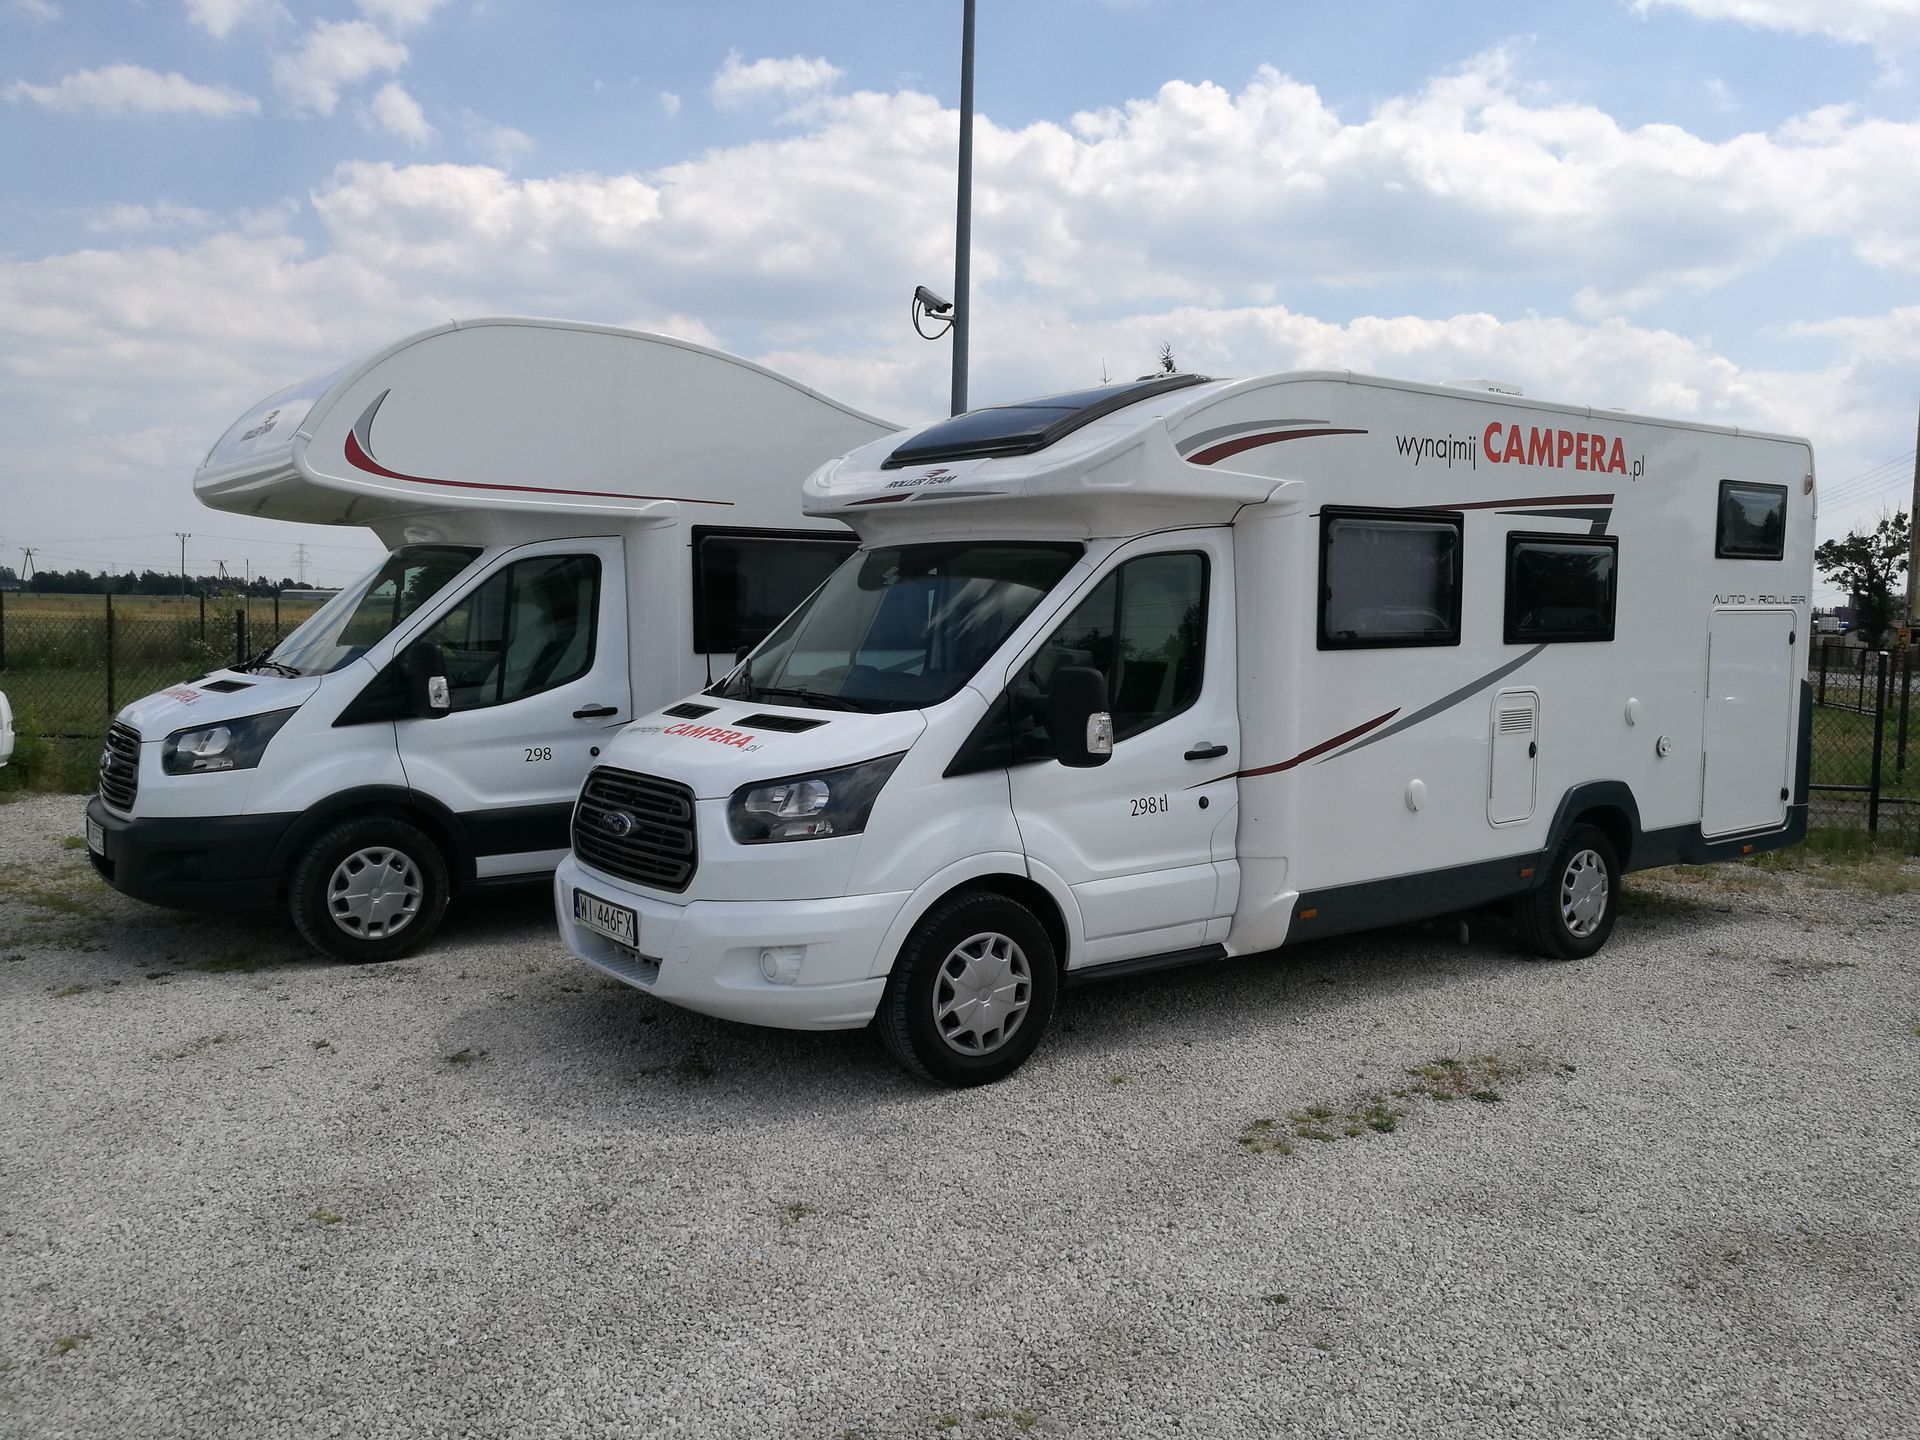 How to make a dream about a motorhome come true and where to service it? – main image